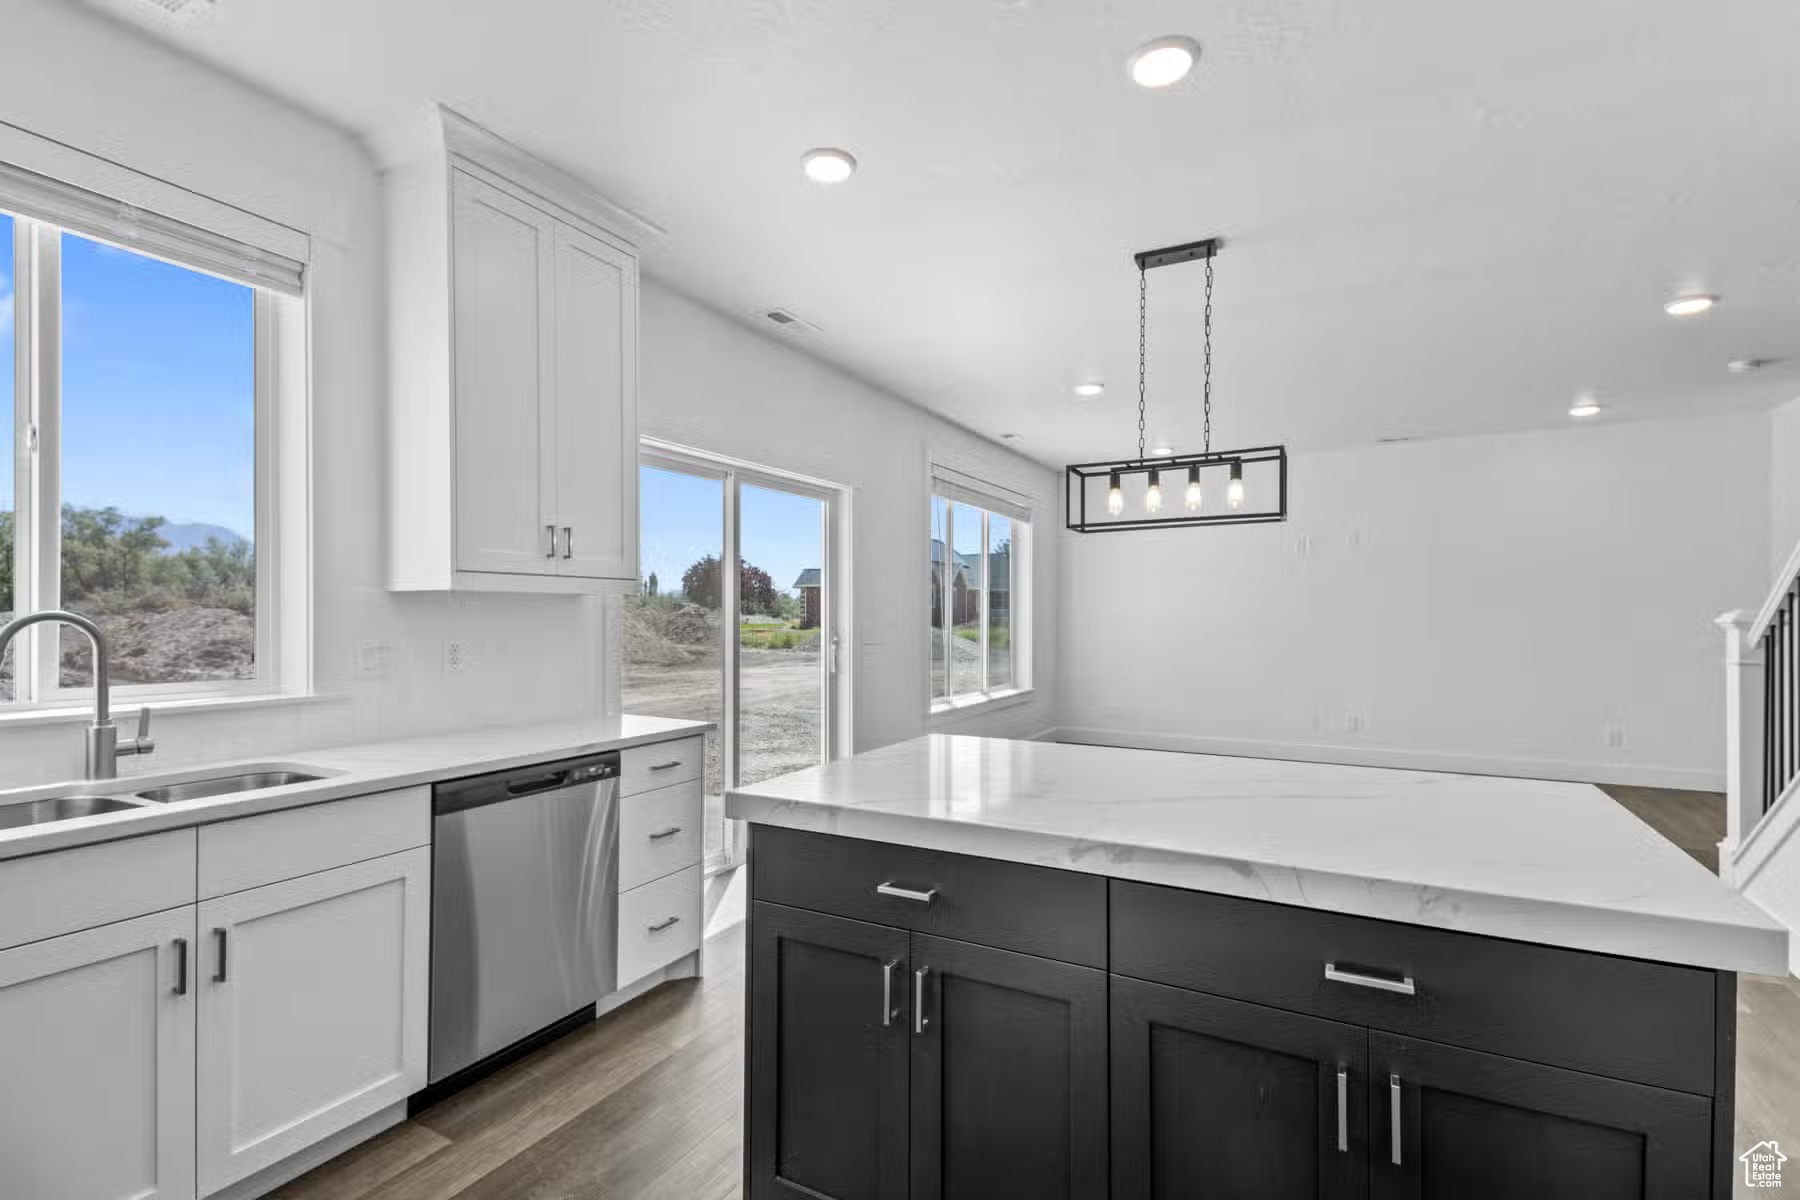 Kitchen featuring pendant lighting, wood-type flooring, white cabinetry, sink, and stainless steel dishwasher